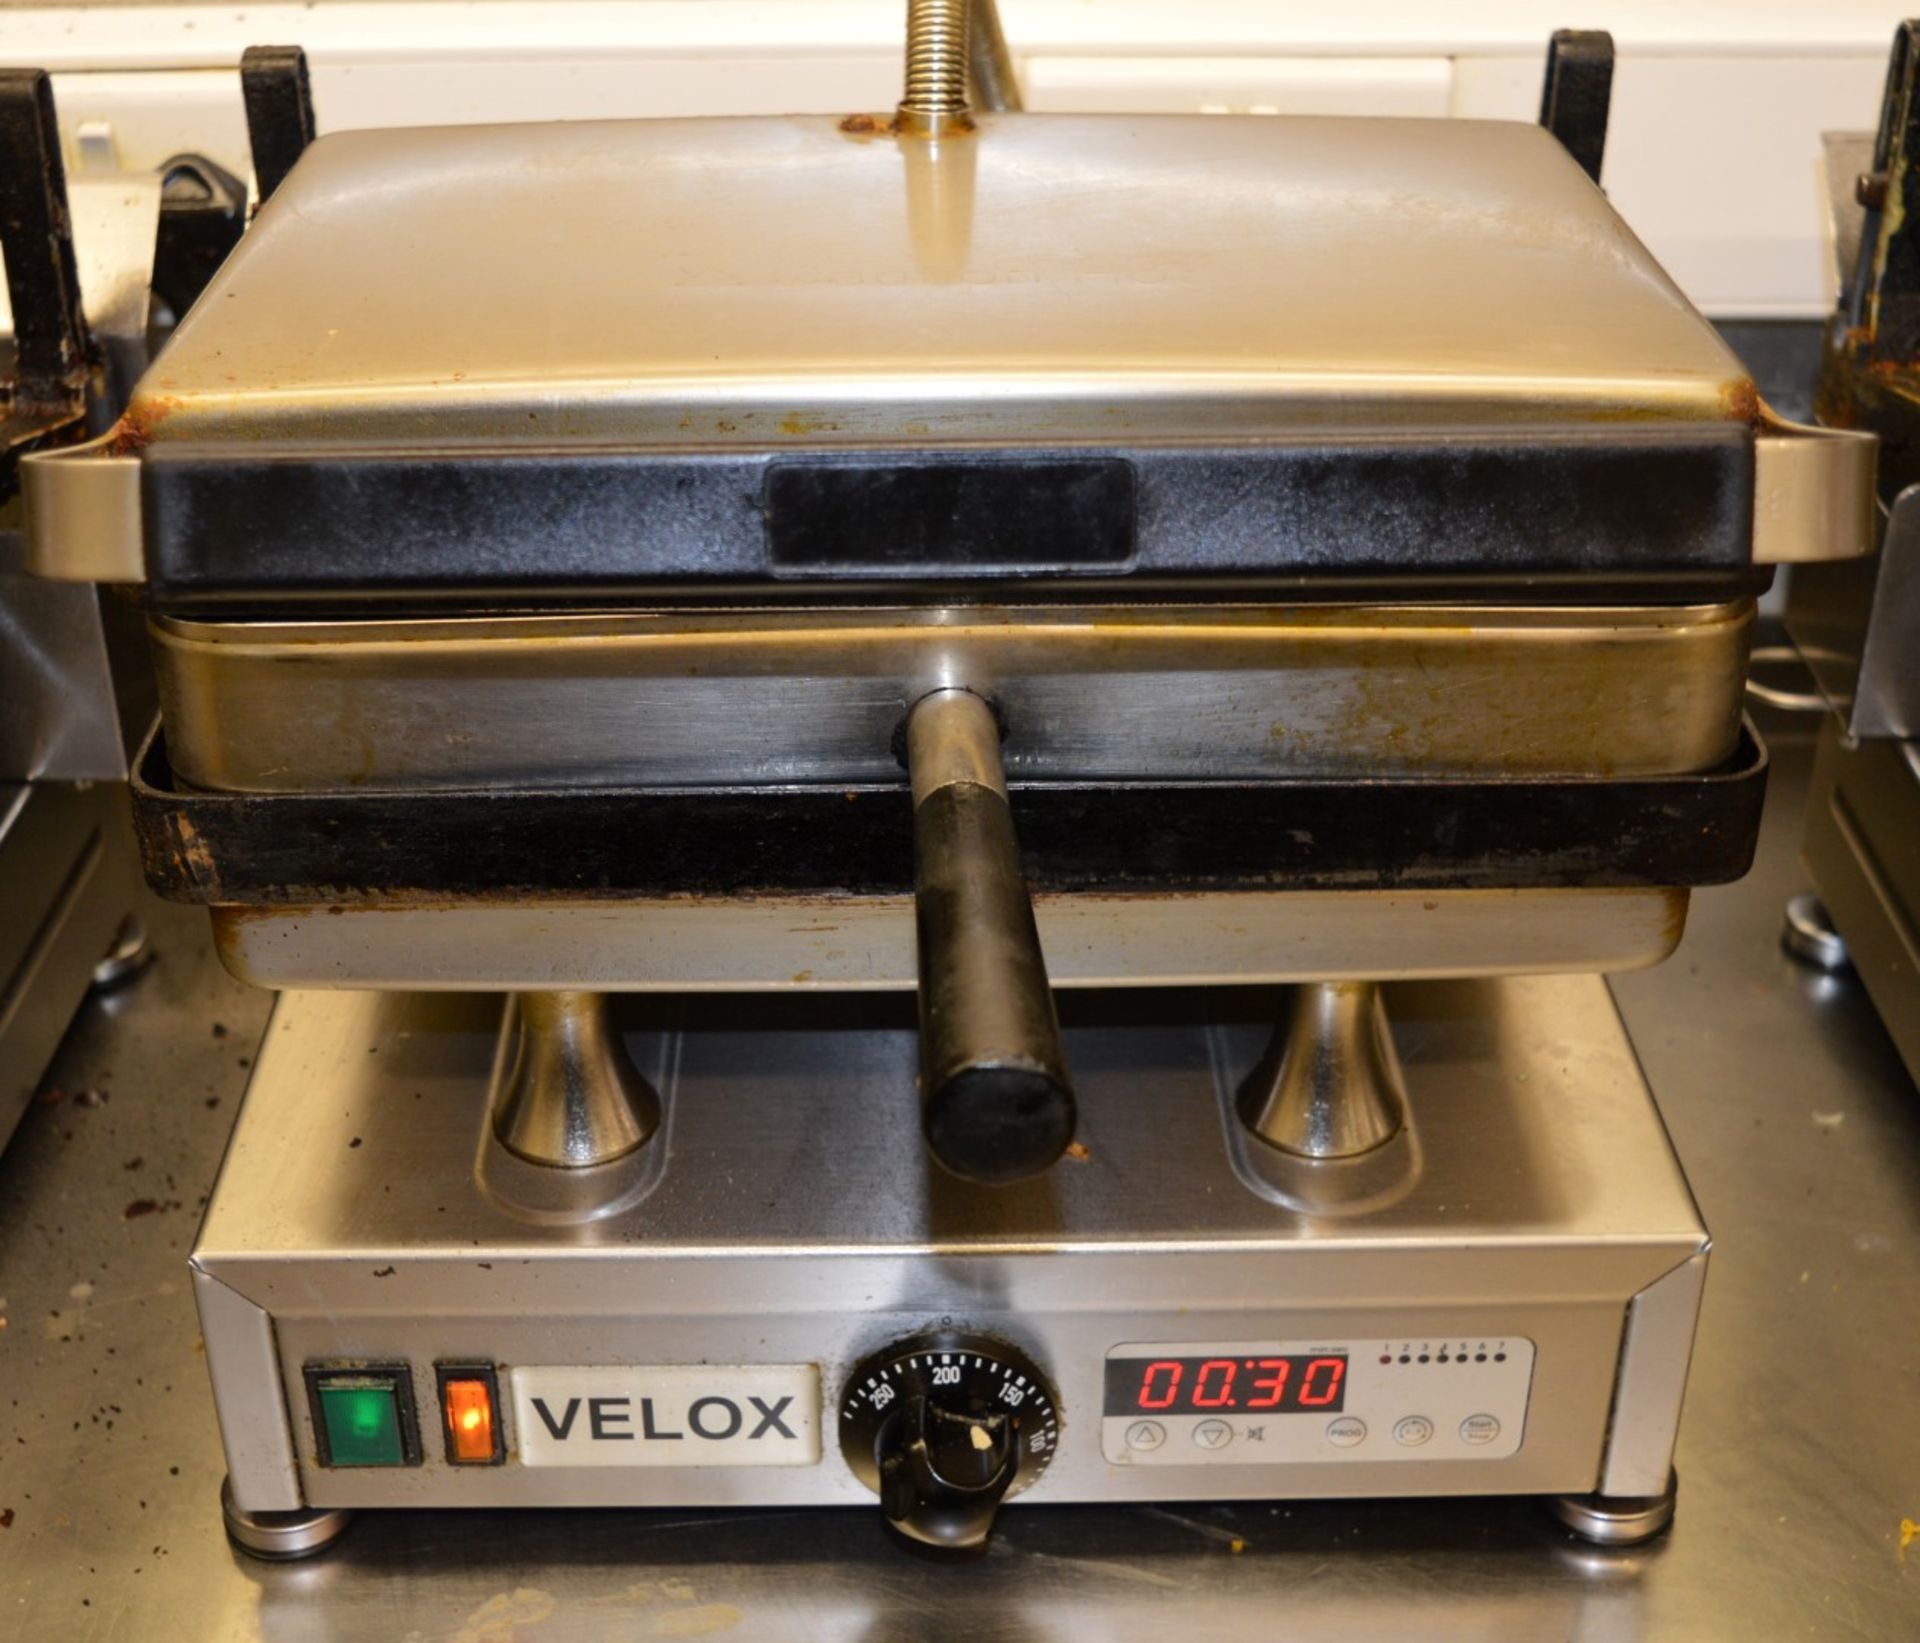 1 x Silesia Velox CG1 Single High Speed Contact Grill - Takes Just 6 Minutes to Reach Cooking - Image 2 of 4